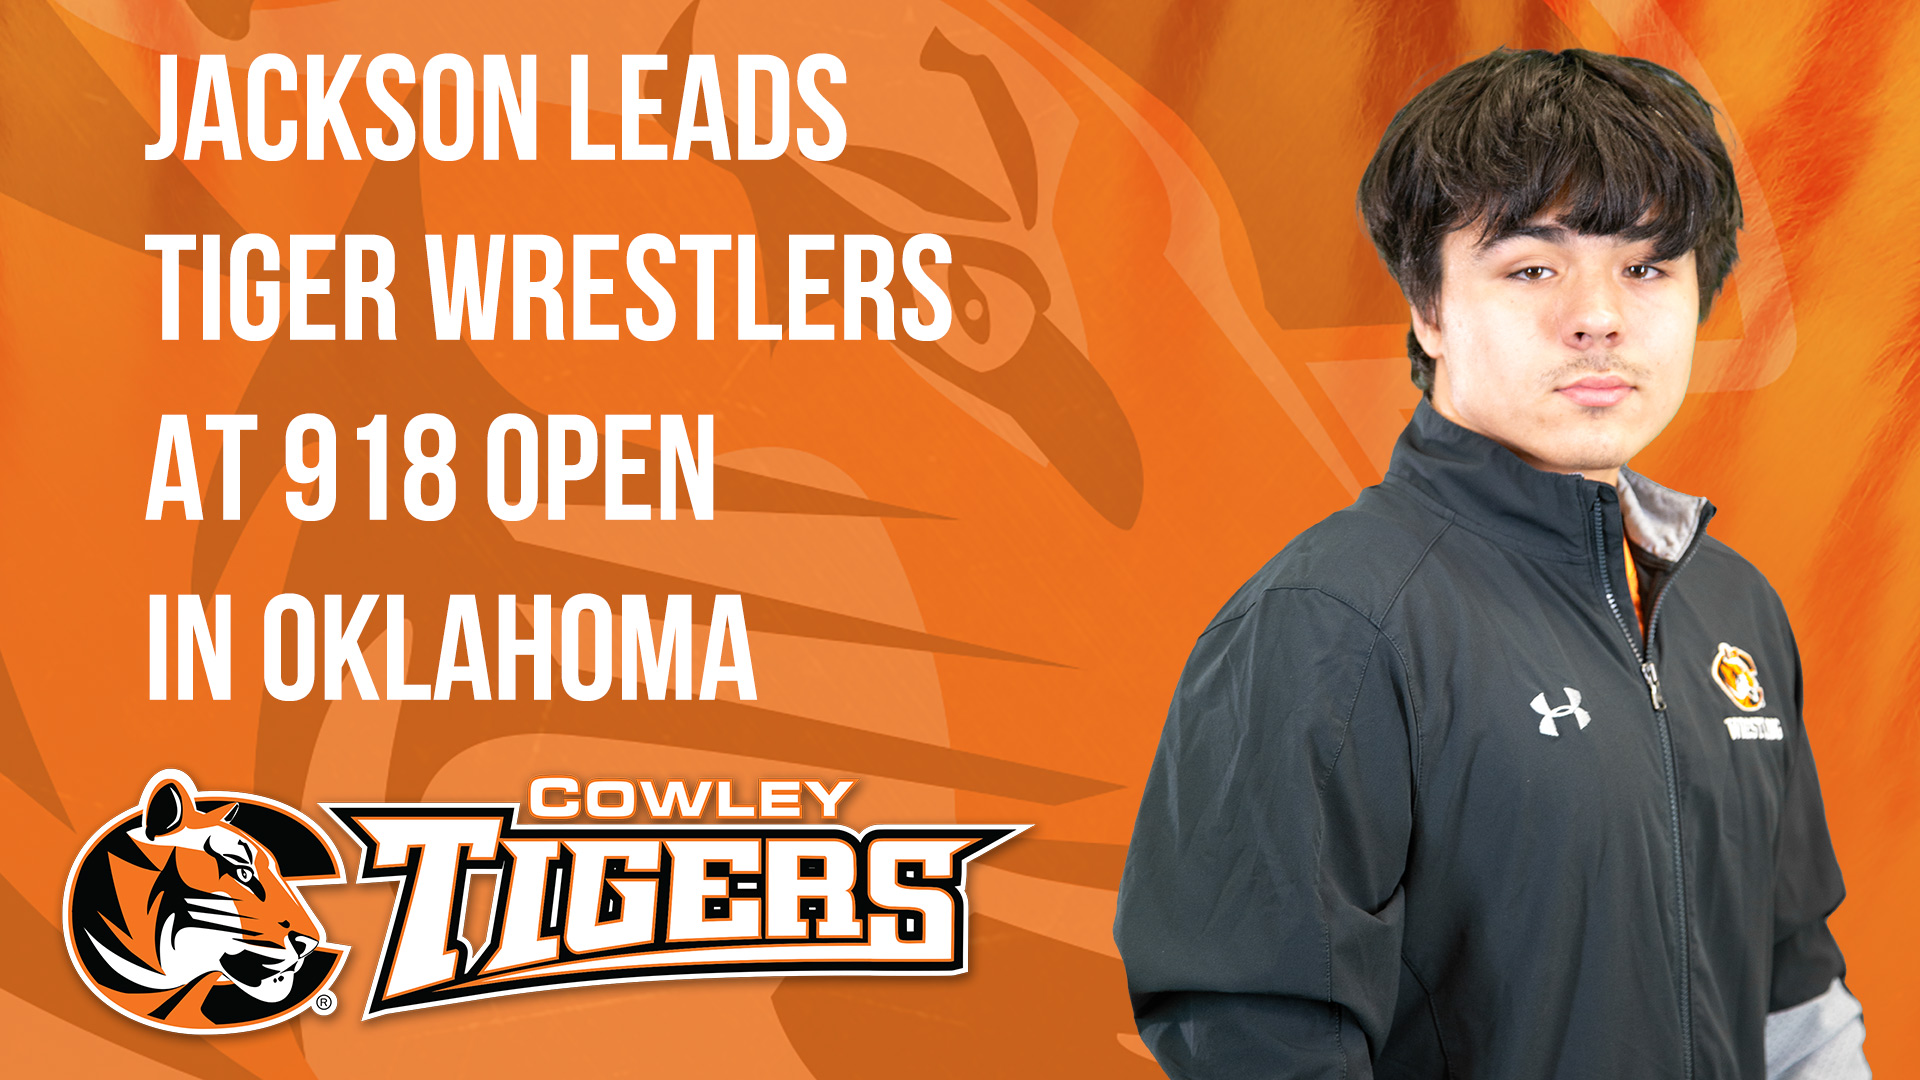 Jackson leads Tiger wrestlers at 918 Open in Oklahoma